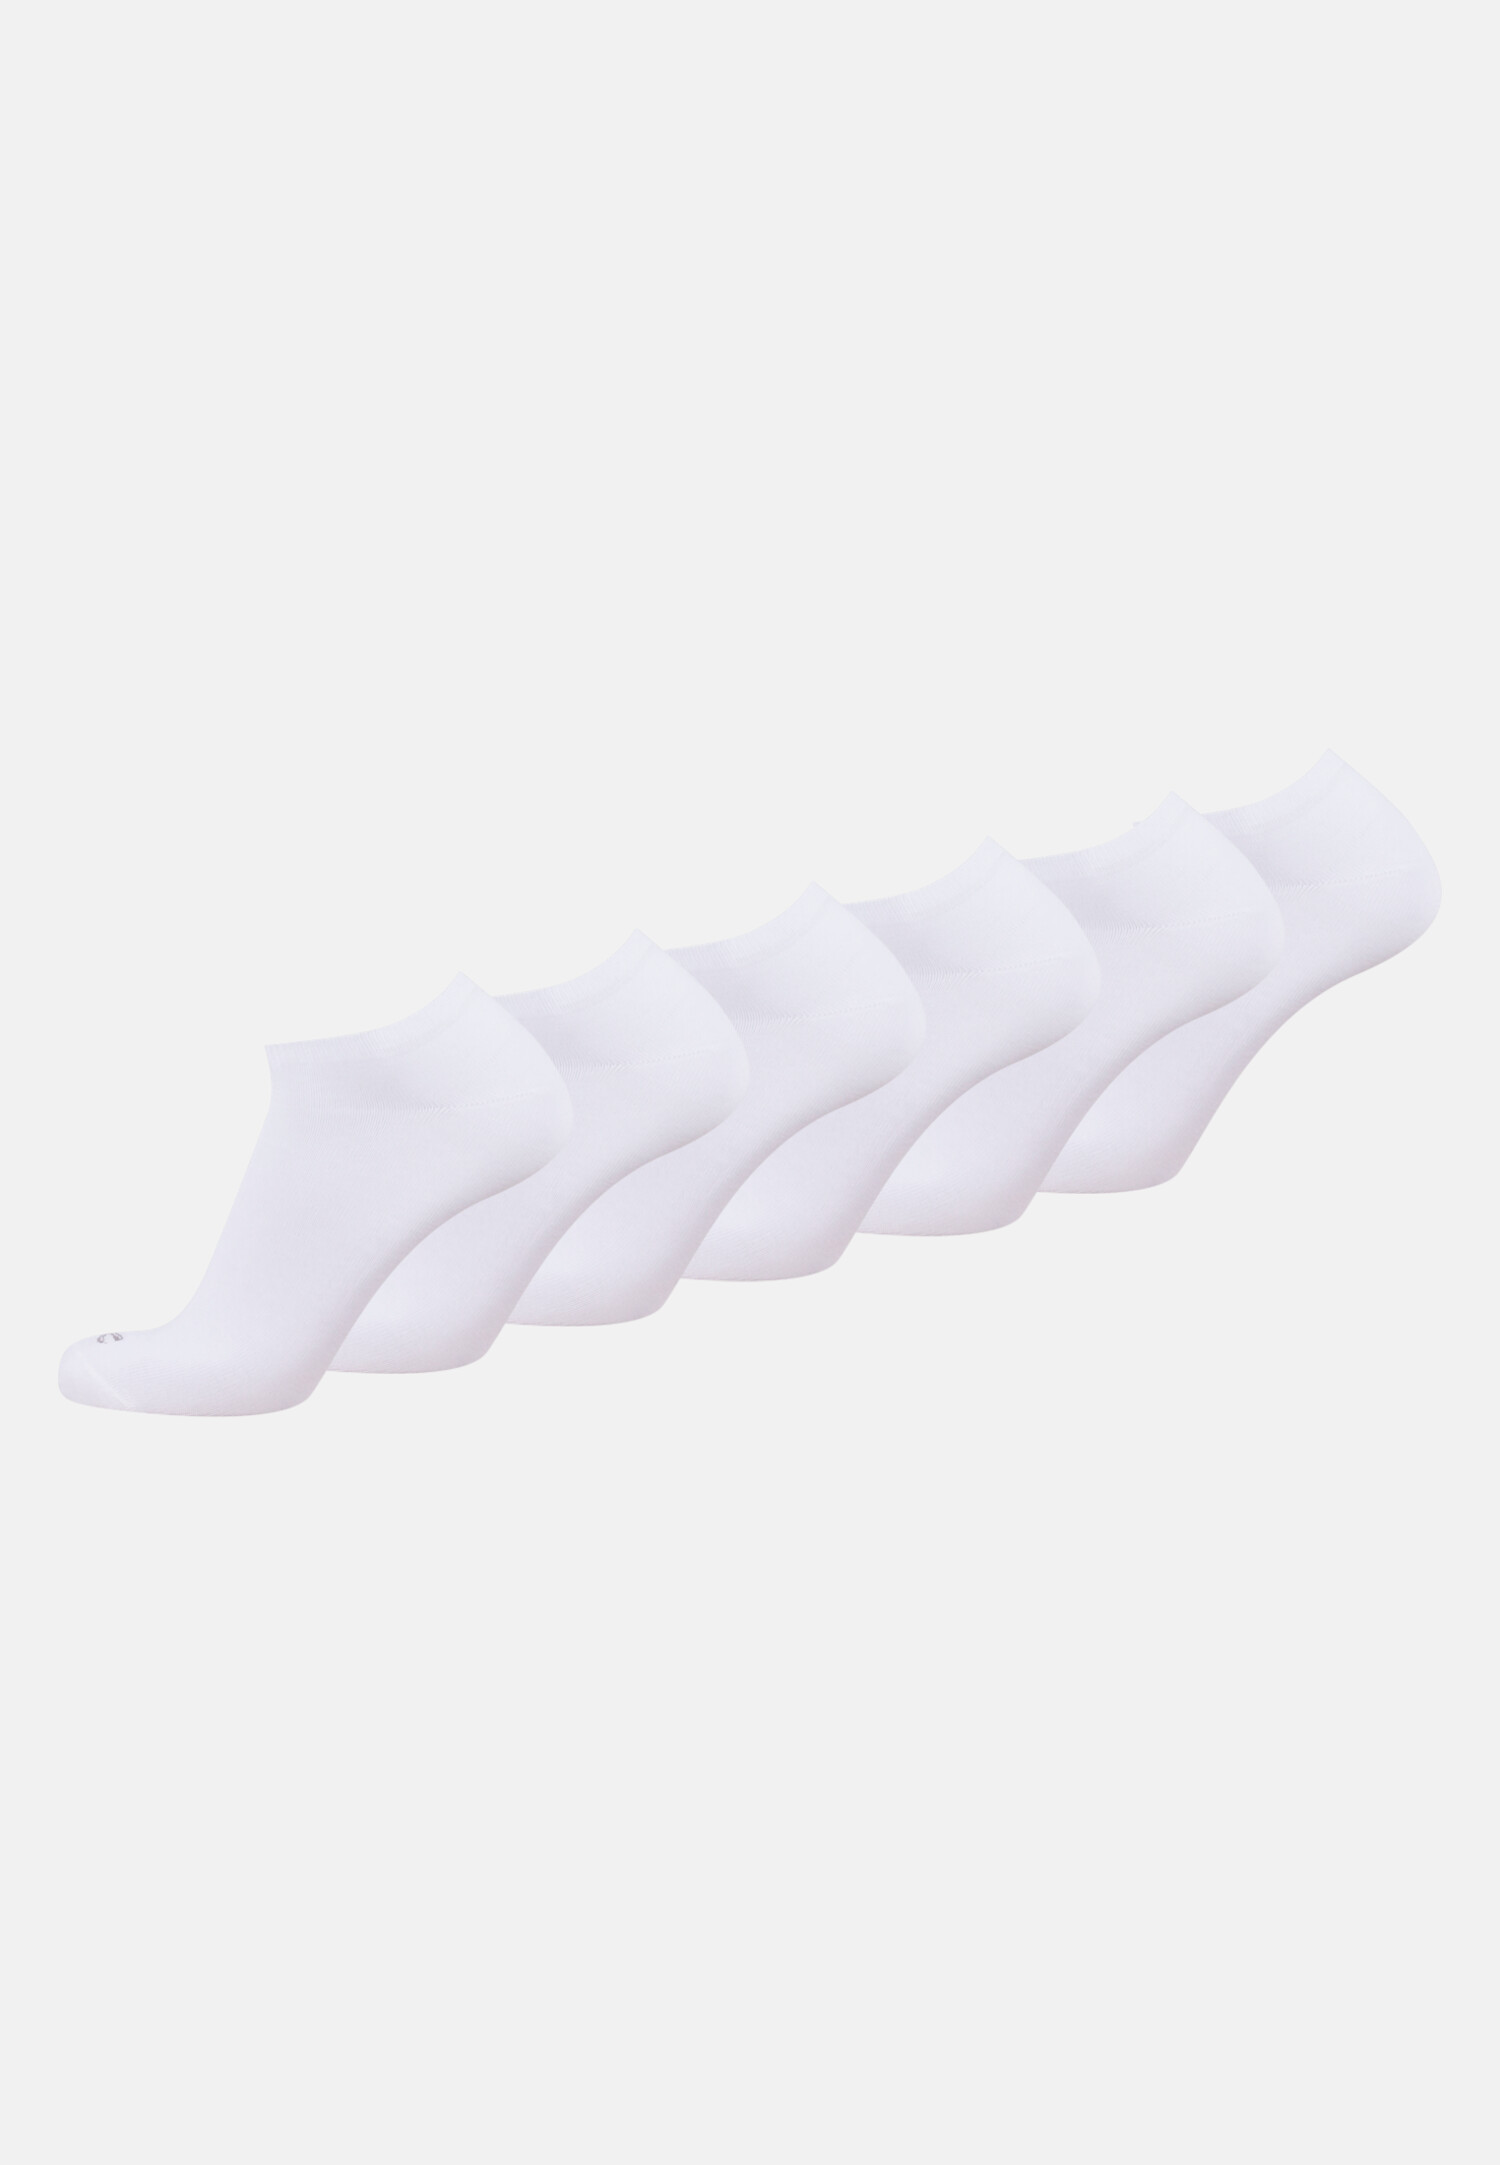 Camel Active Sneaker socks in a pack of 6